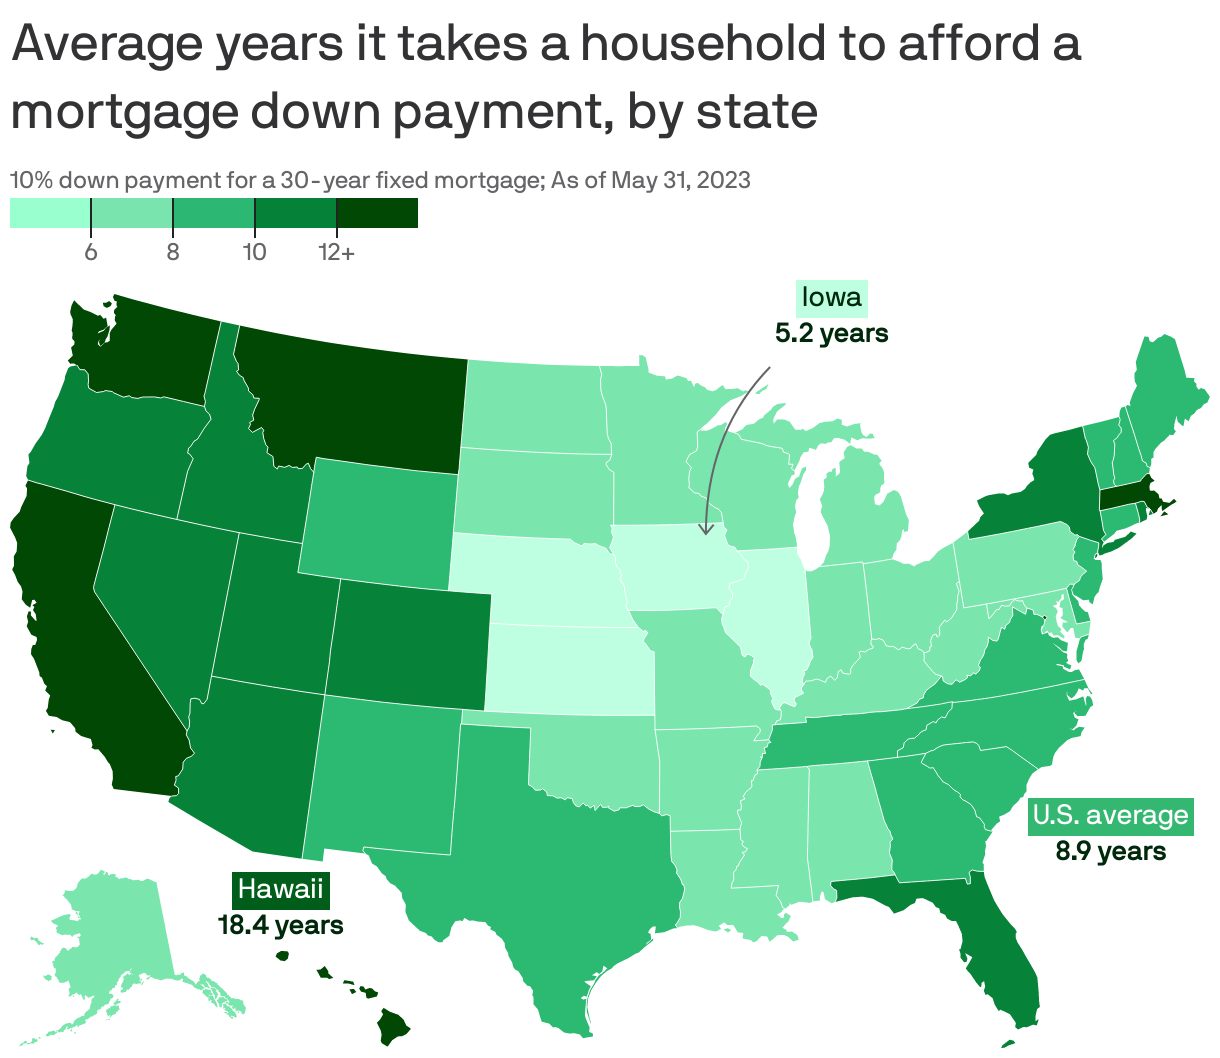 Average years it takes a household to afford a mortgage down payment, by state